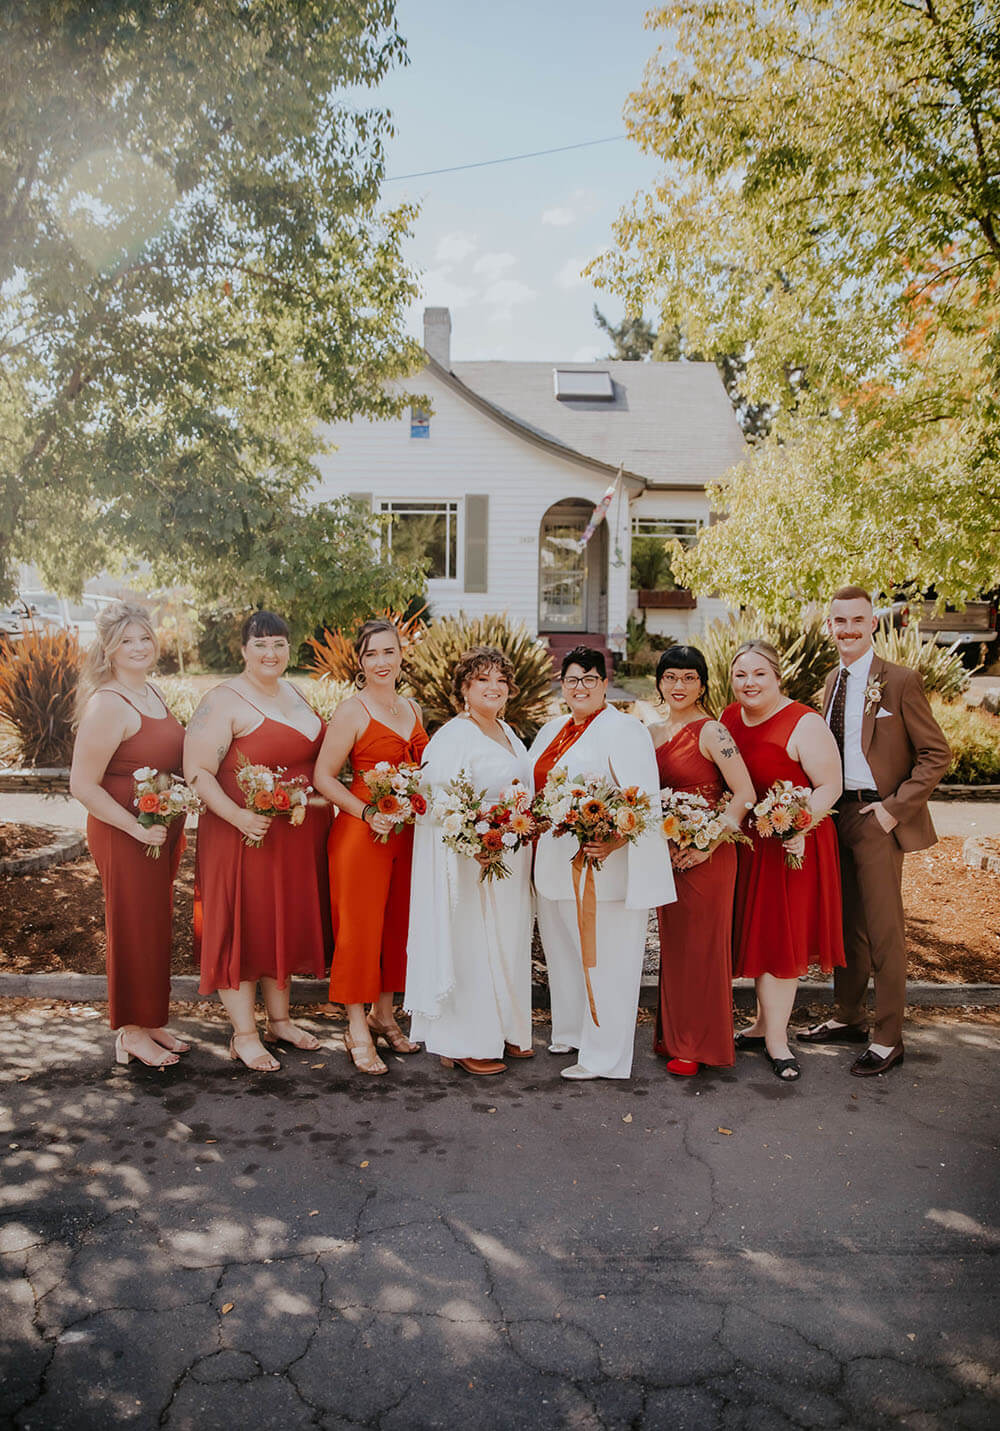 Red wedding party | Photo by LGBTQ Photographer Studio XIII Photography